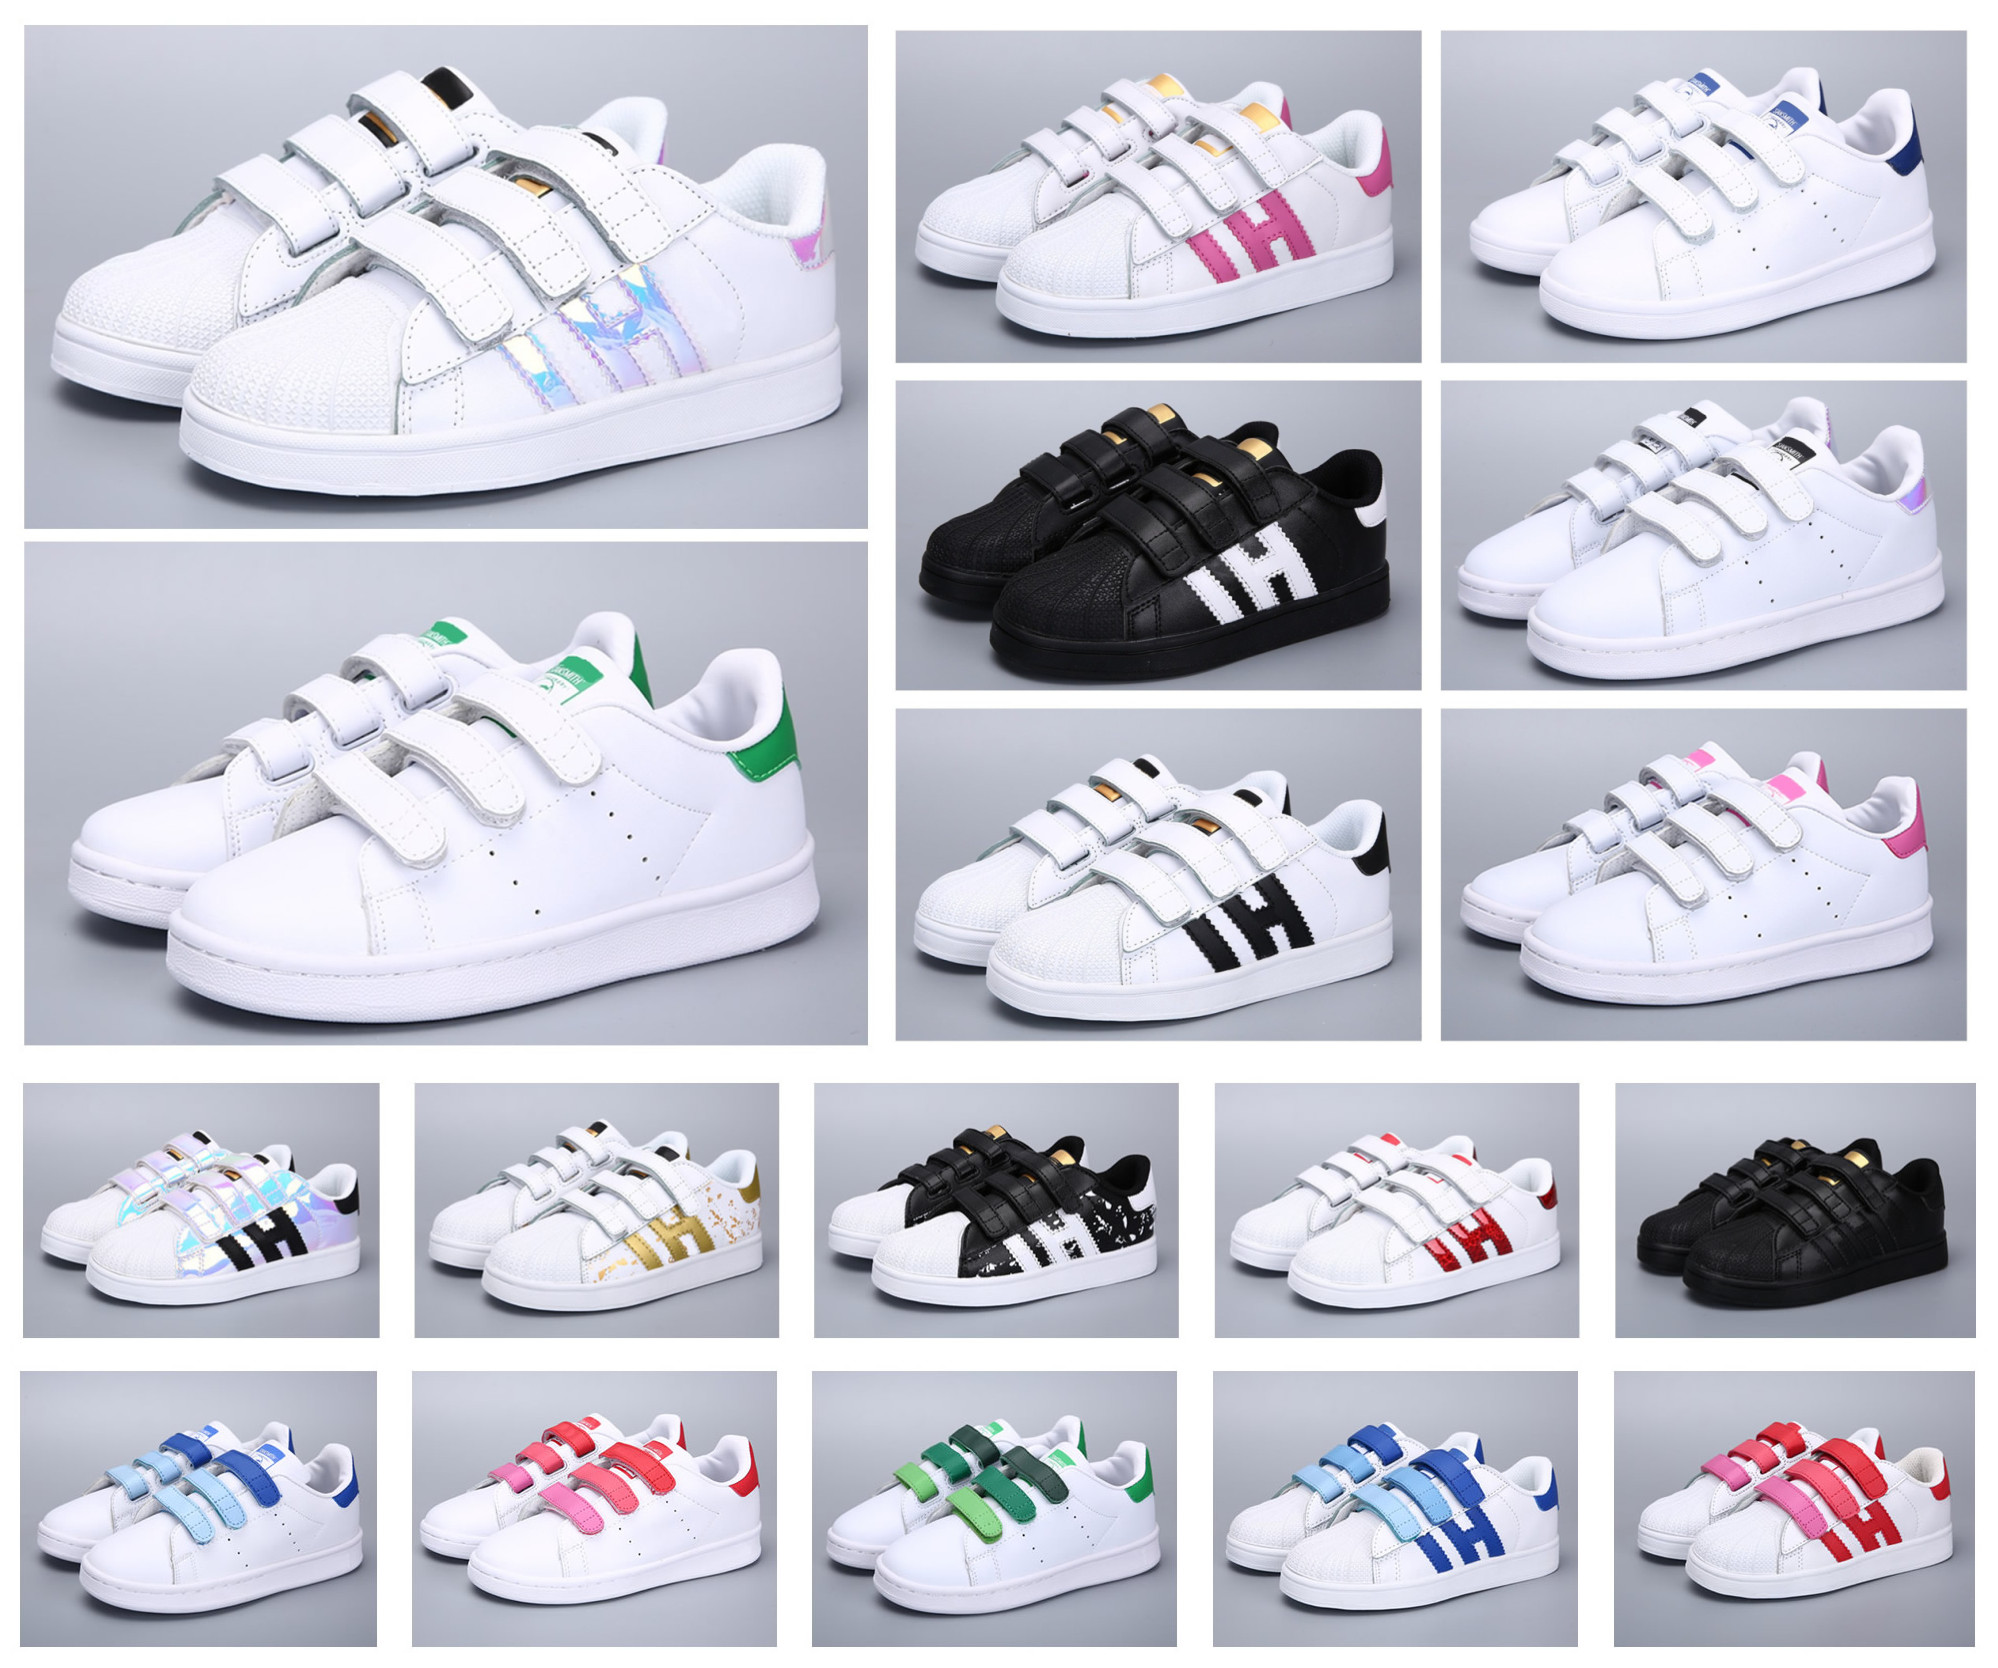 

Classic Youth Stan Smith Superstar Kids Girls Child Boys Baby Children Shoes Casual Sport Size 24-35